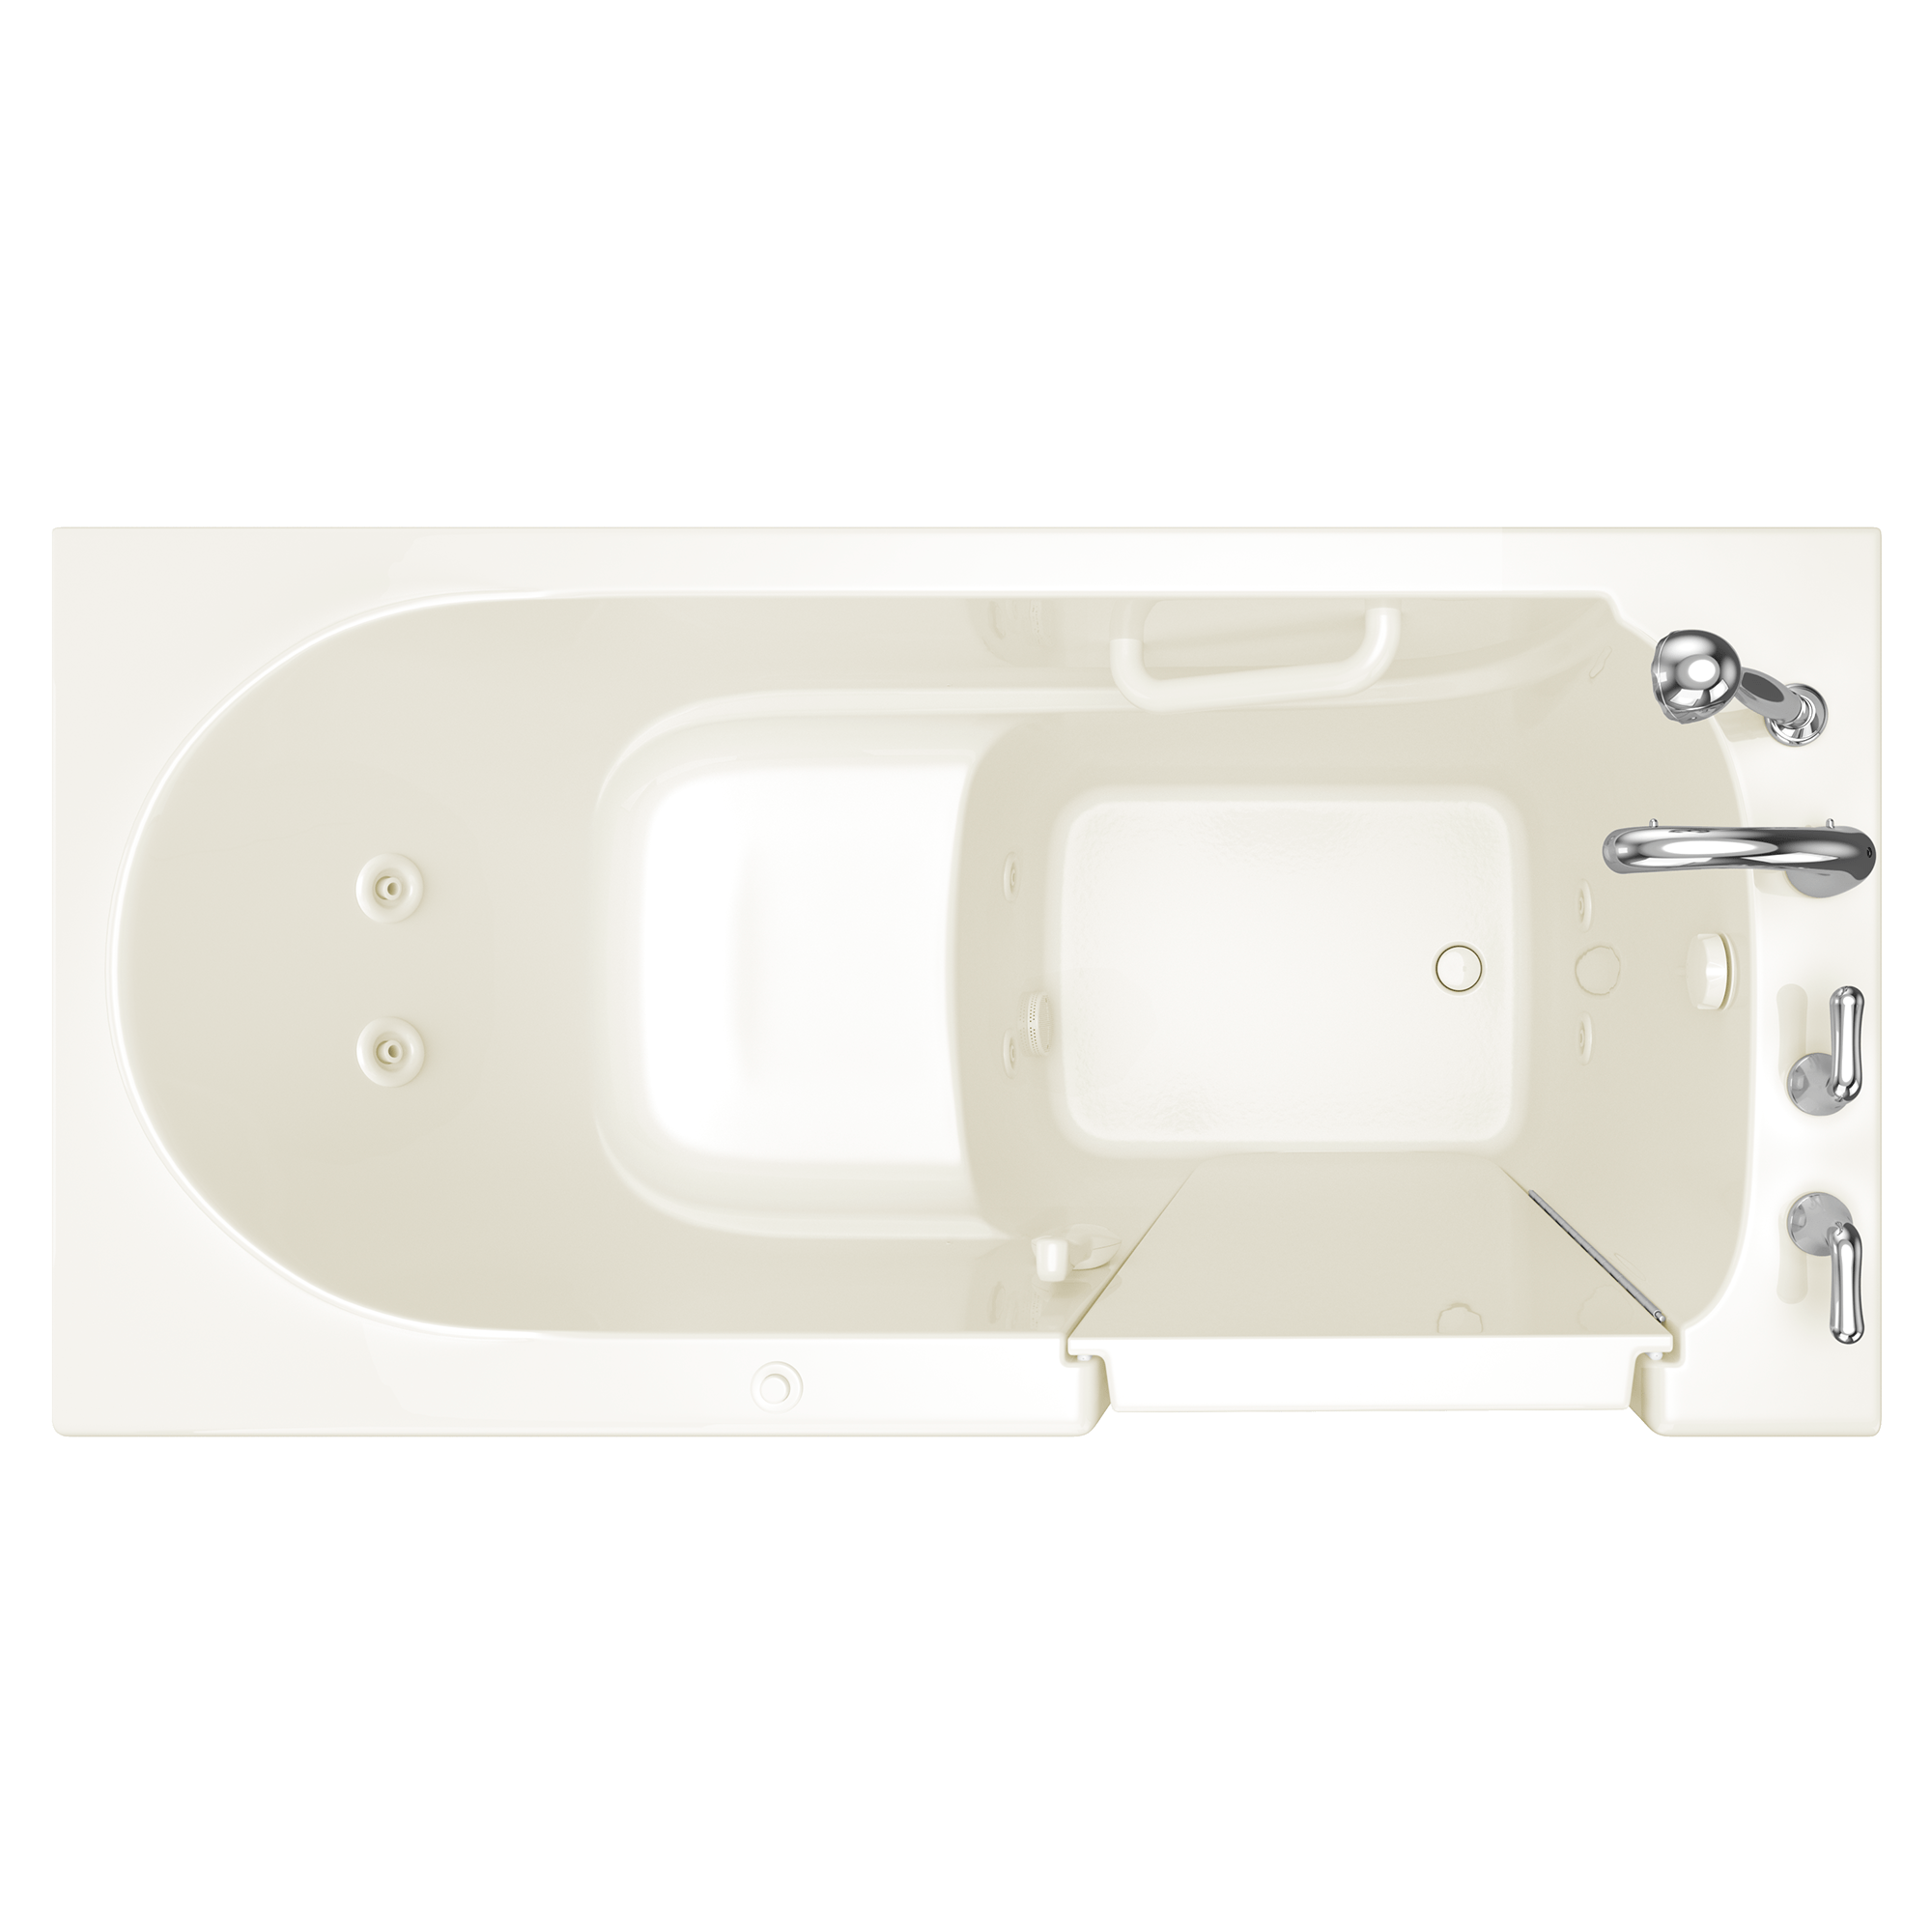 Gelcoat Entry Series 60 x 30 Inch Walk In Tub With Whirlpool System - Right Hand Drain With Faucet ST BISCUIT